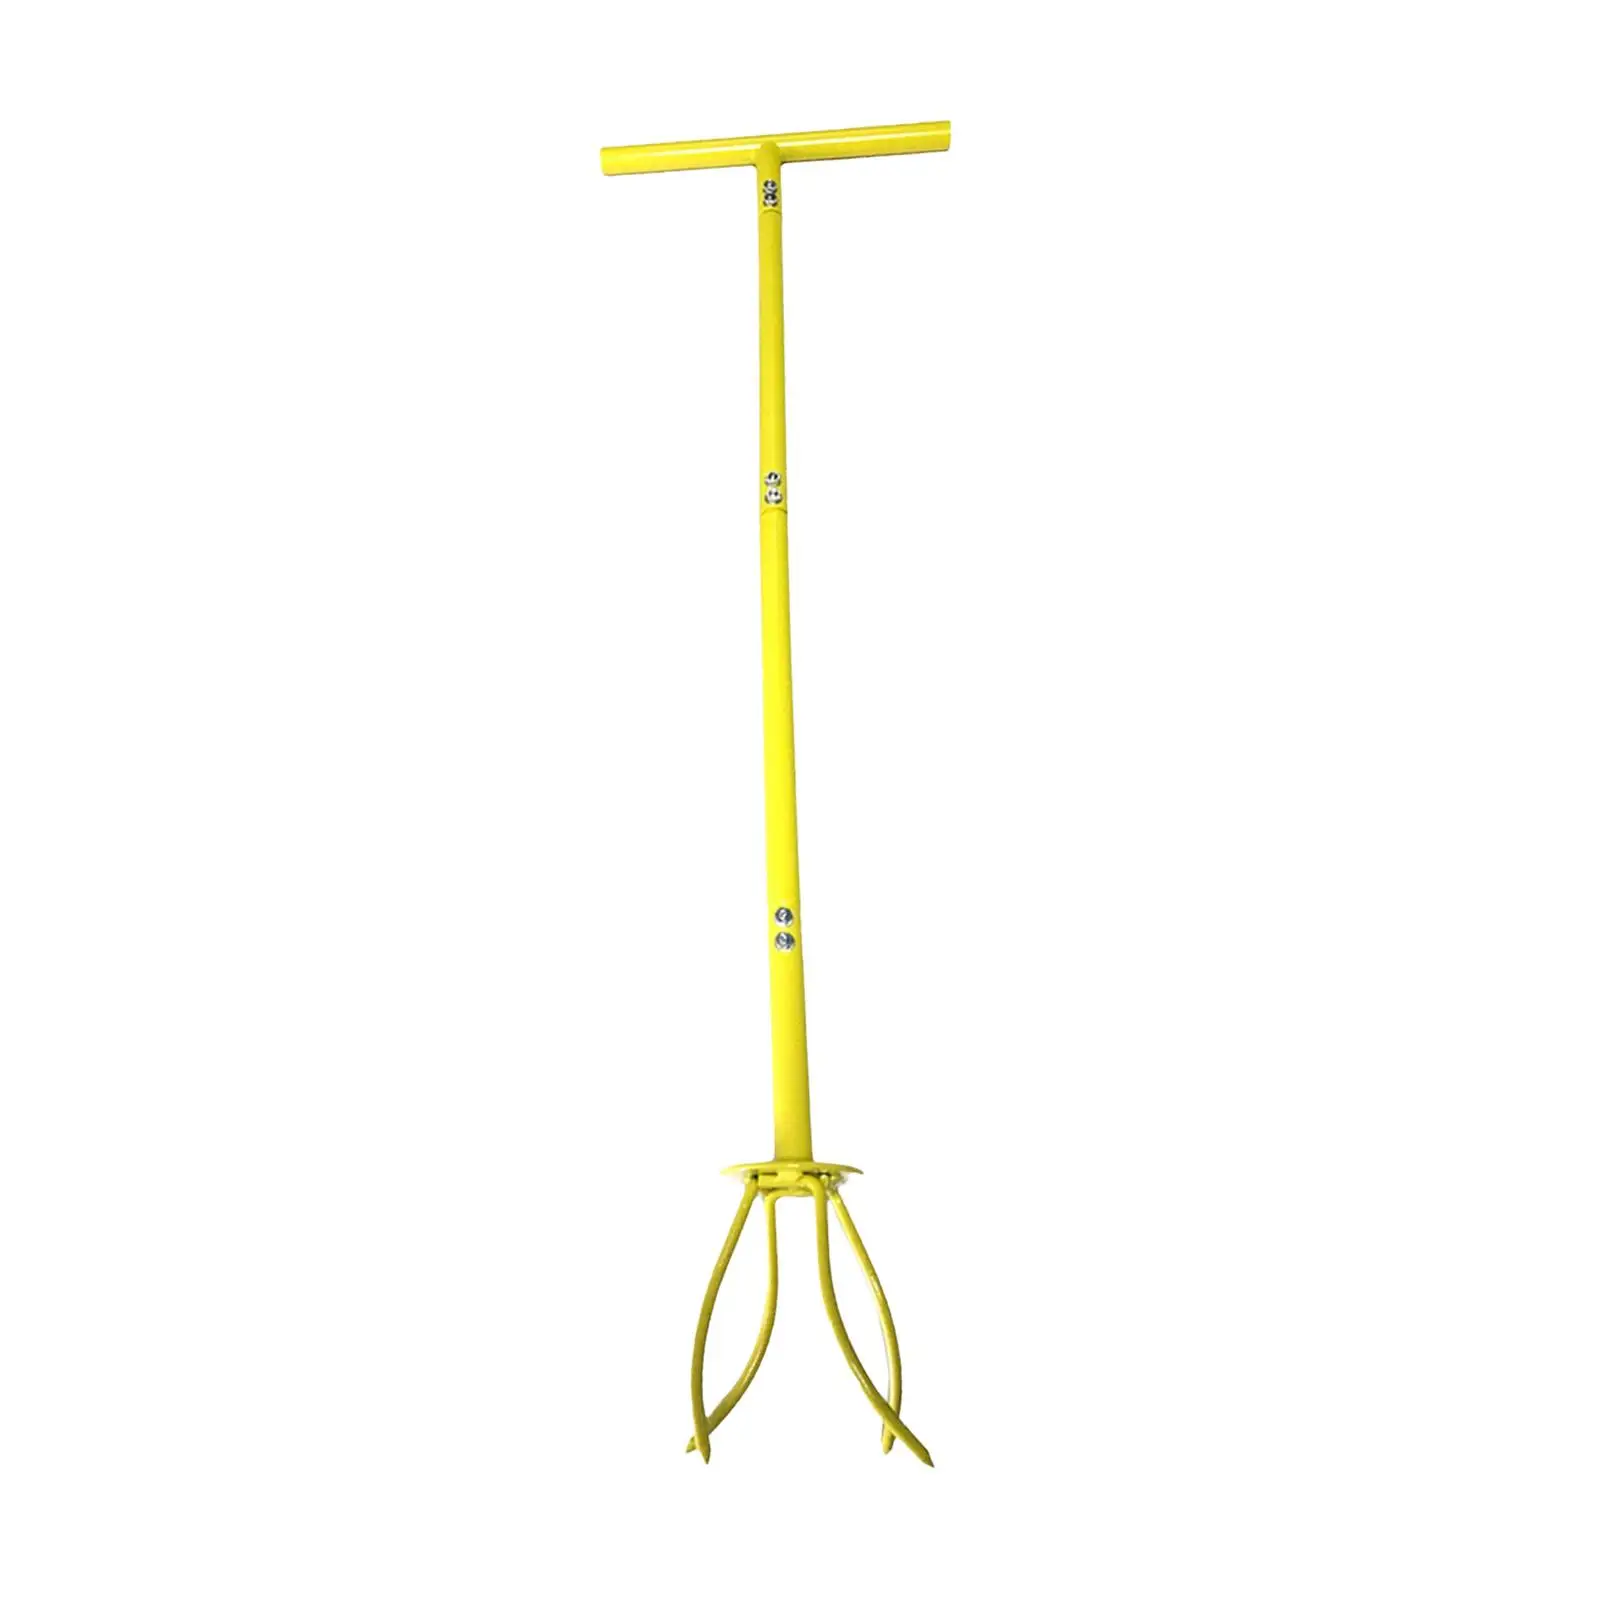 Manual Hand Tiller Detachable for Narrow and Wide Areas No Bending T Shaped Handle Agriculture Farmer Tool Manual Soil Grabber